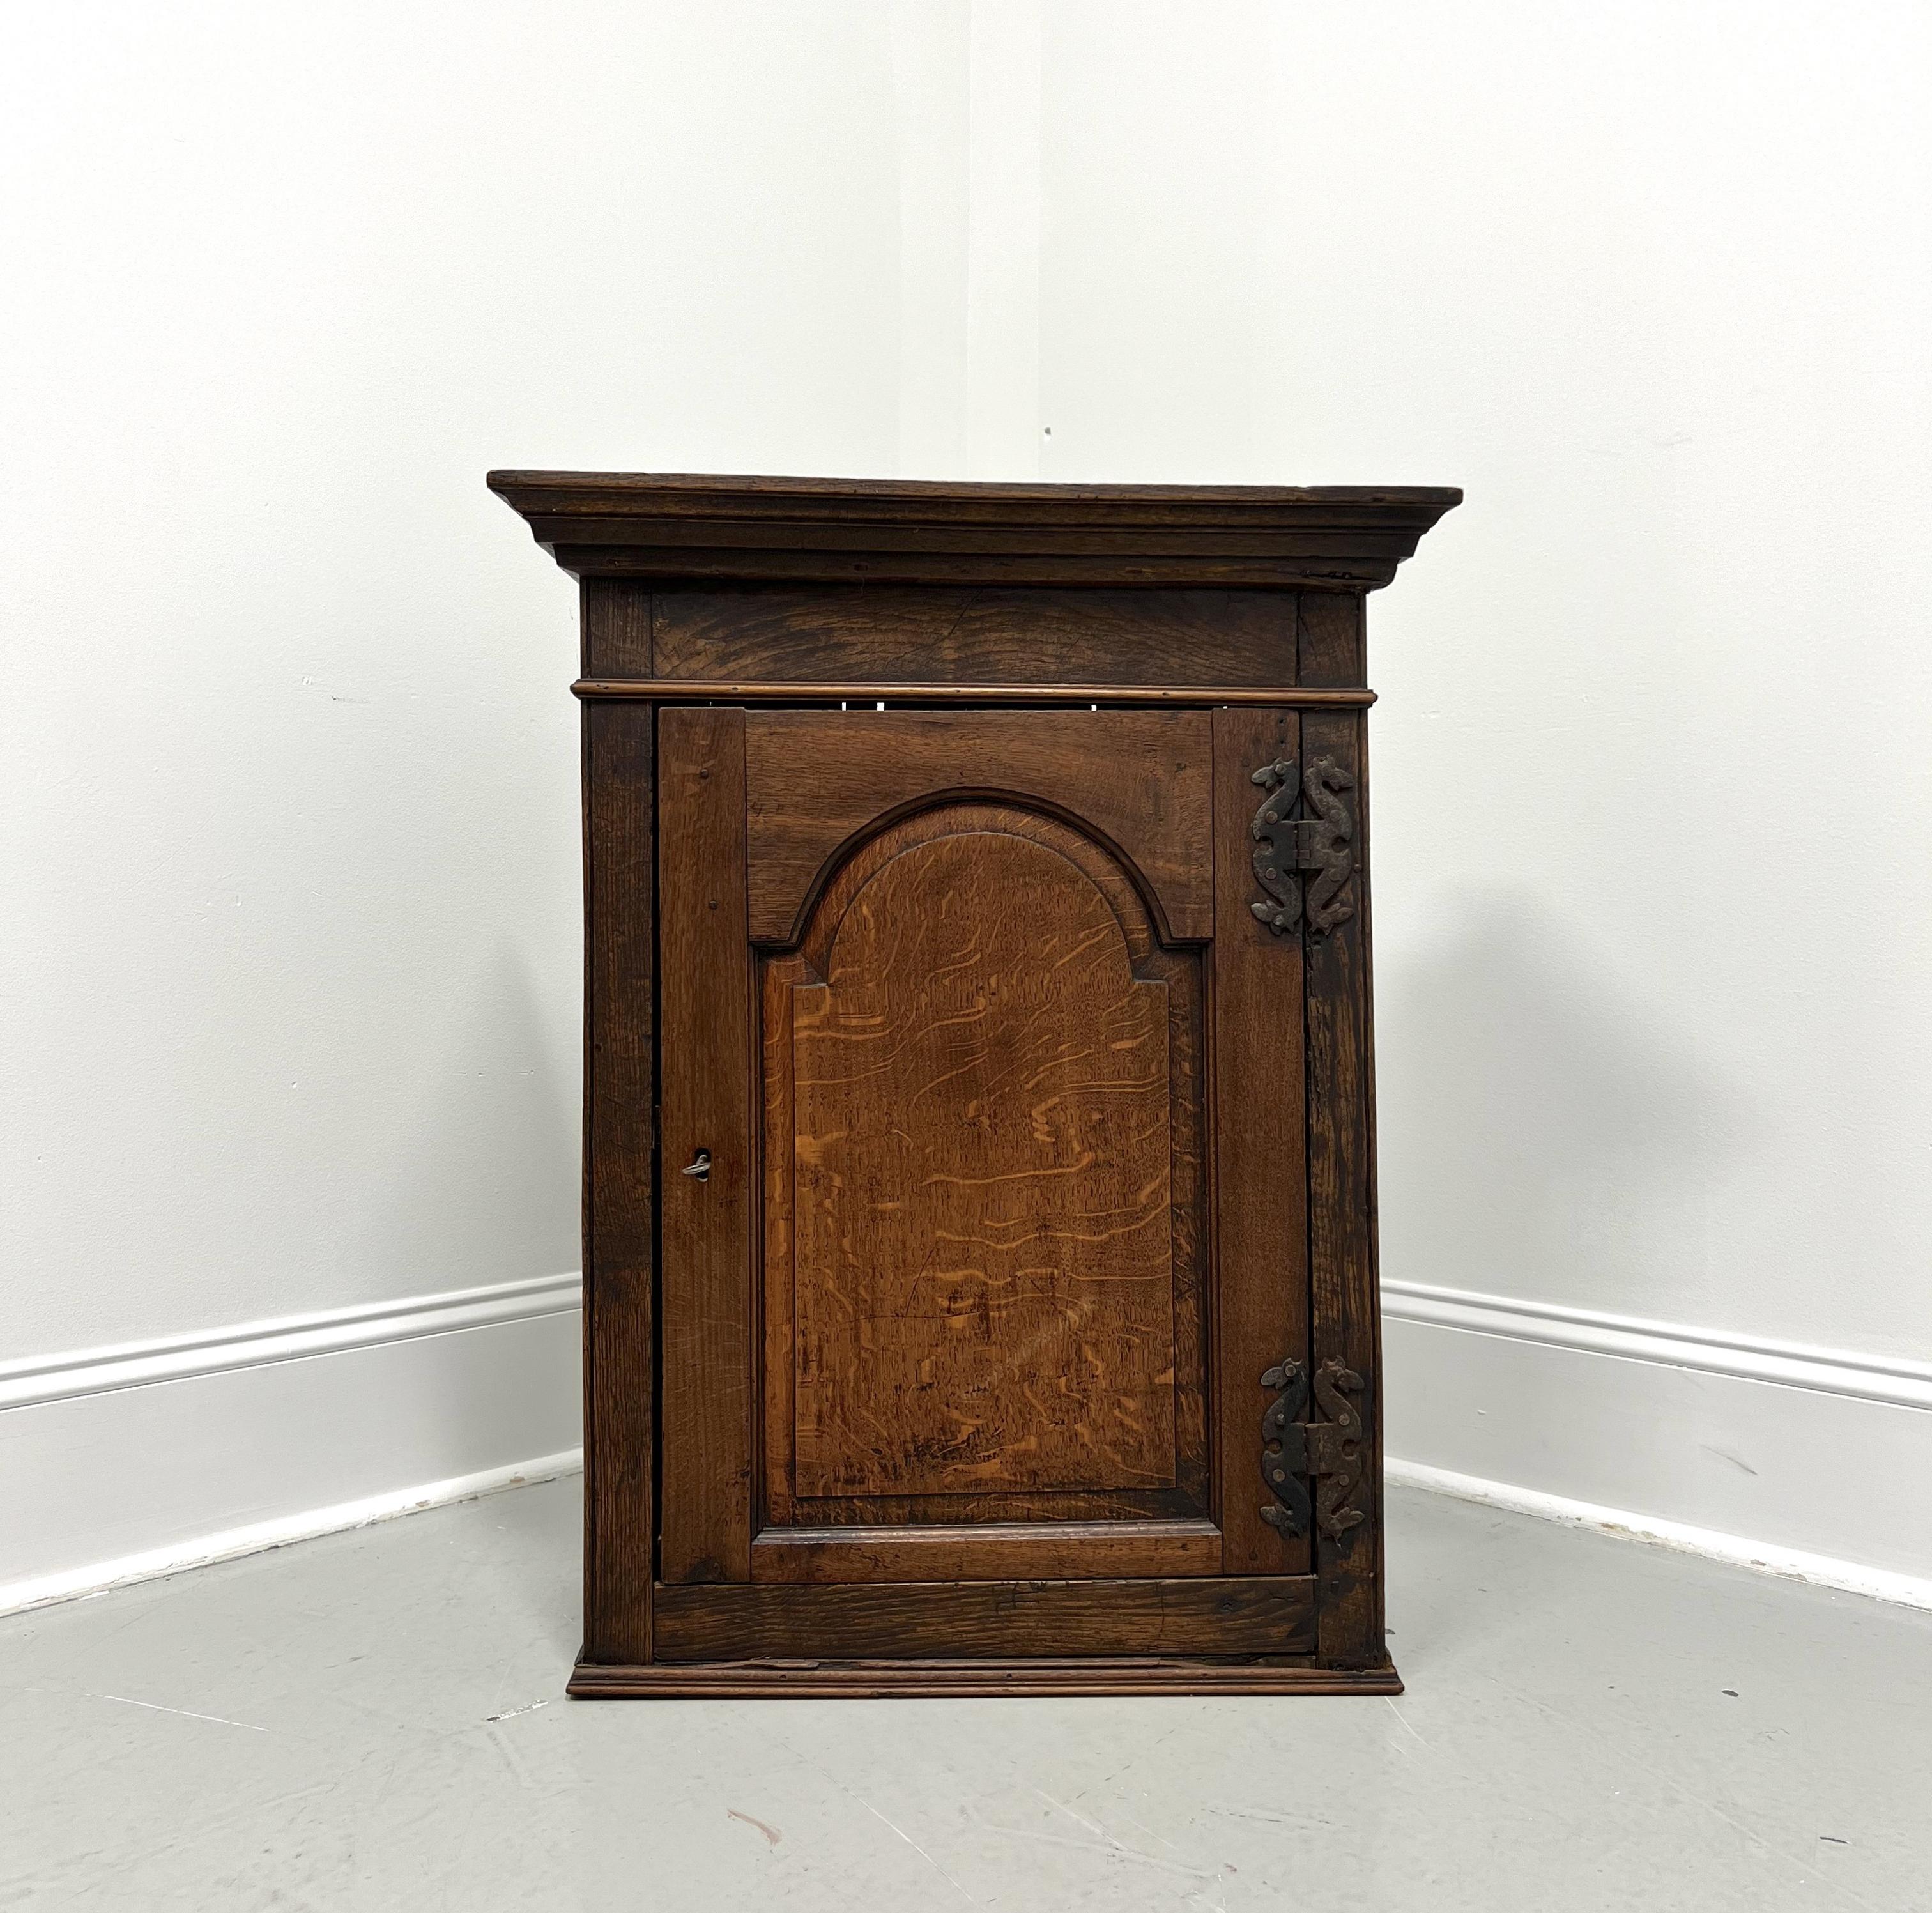 An antique Chippendale style hanging cupboard, unbranded. Handcrafted of quartersawn oak with crown molding to the top, a tombstone panel door, serpentine shaped brass hinge hardware, an ogee edge to the base, and metal wall hangers attached to the